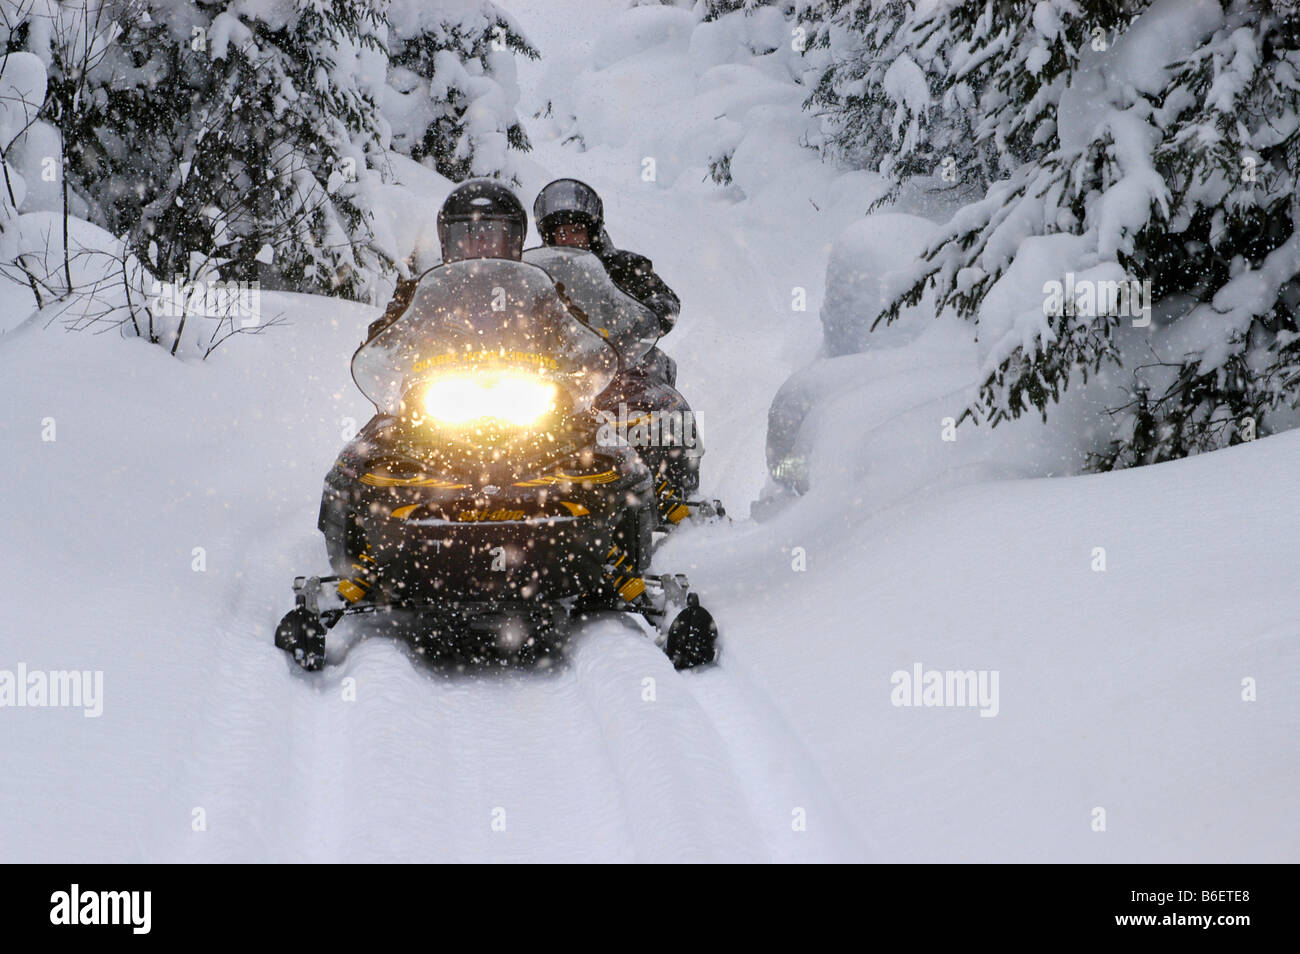 Snow mobile, snow mobile in the snow, Saguenay Lac Saint Jean Region, Mont Valin, Quebec, Canada, North America Stock Photo